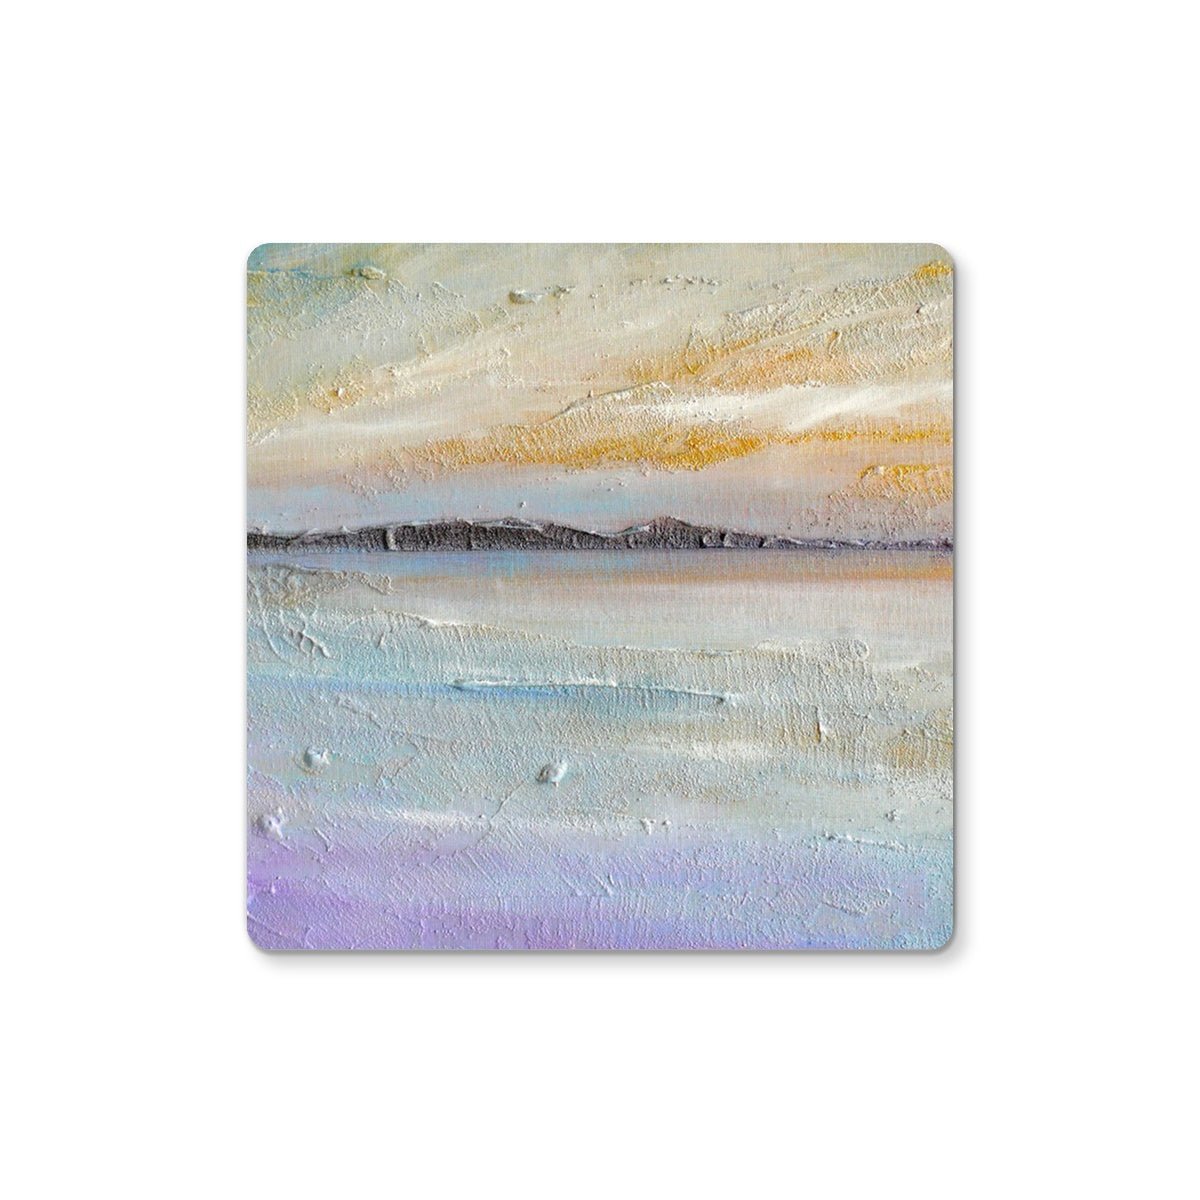 Sollas Beach South Uist Art Gifts Coaster-Coasters-Hebridean Islands Art Gallery-2 Coasters-Paintings, Prints, Homeware, Art Gifts From Scotland By Scottish Artist Kevin Hunter